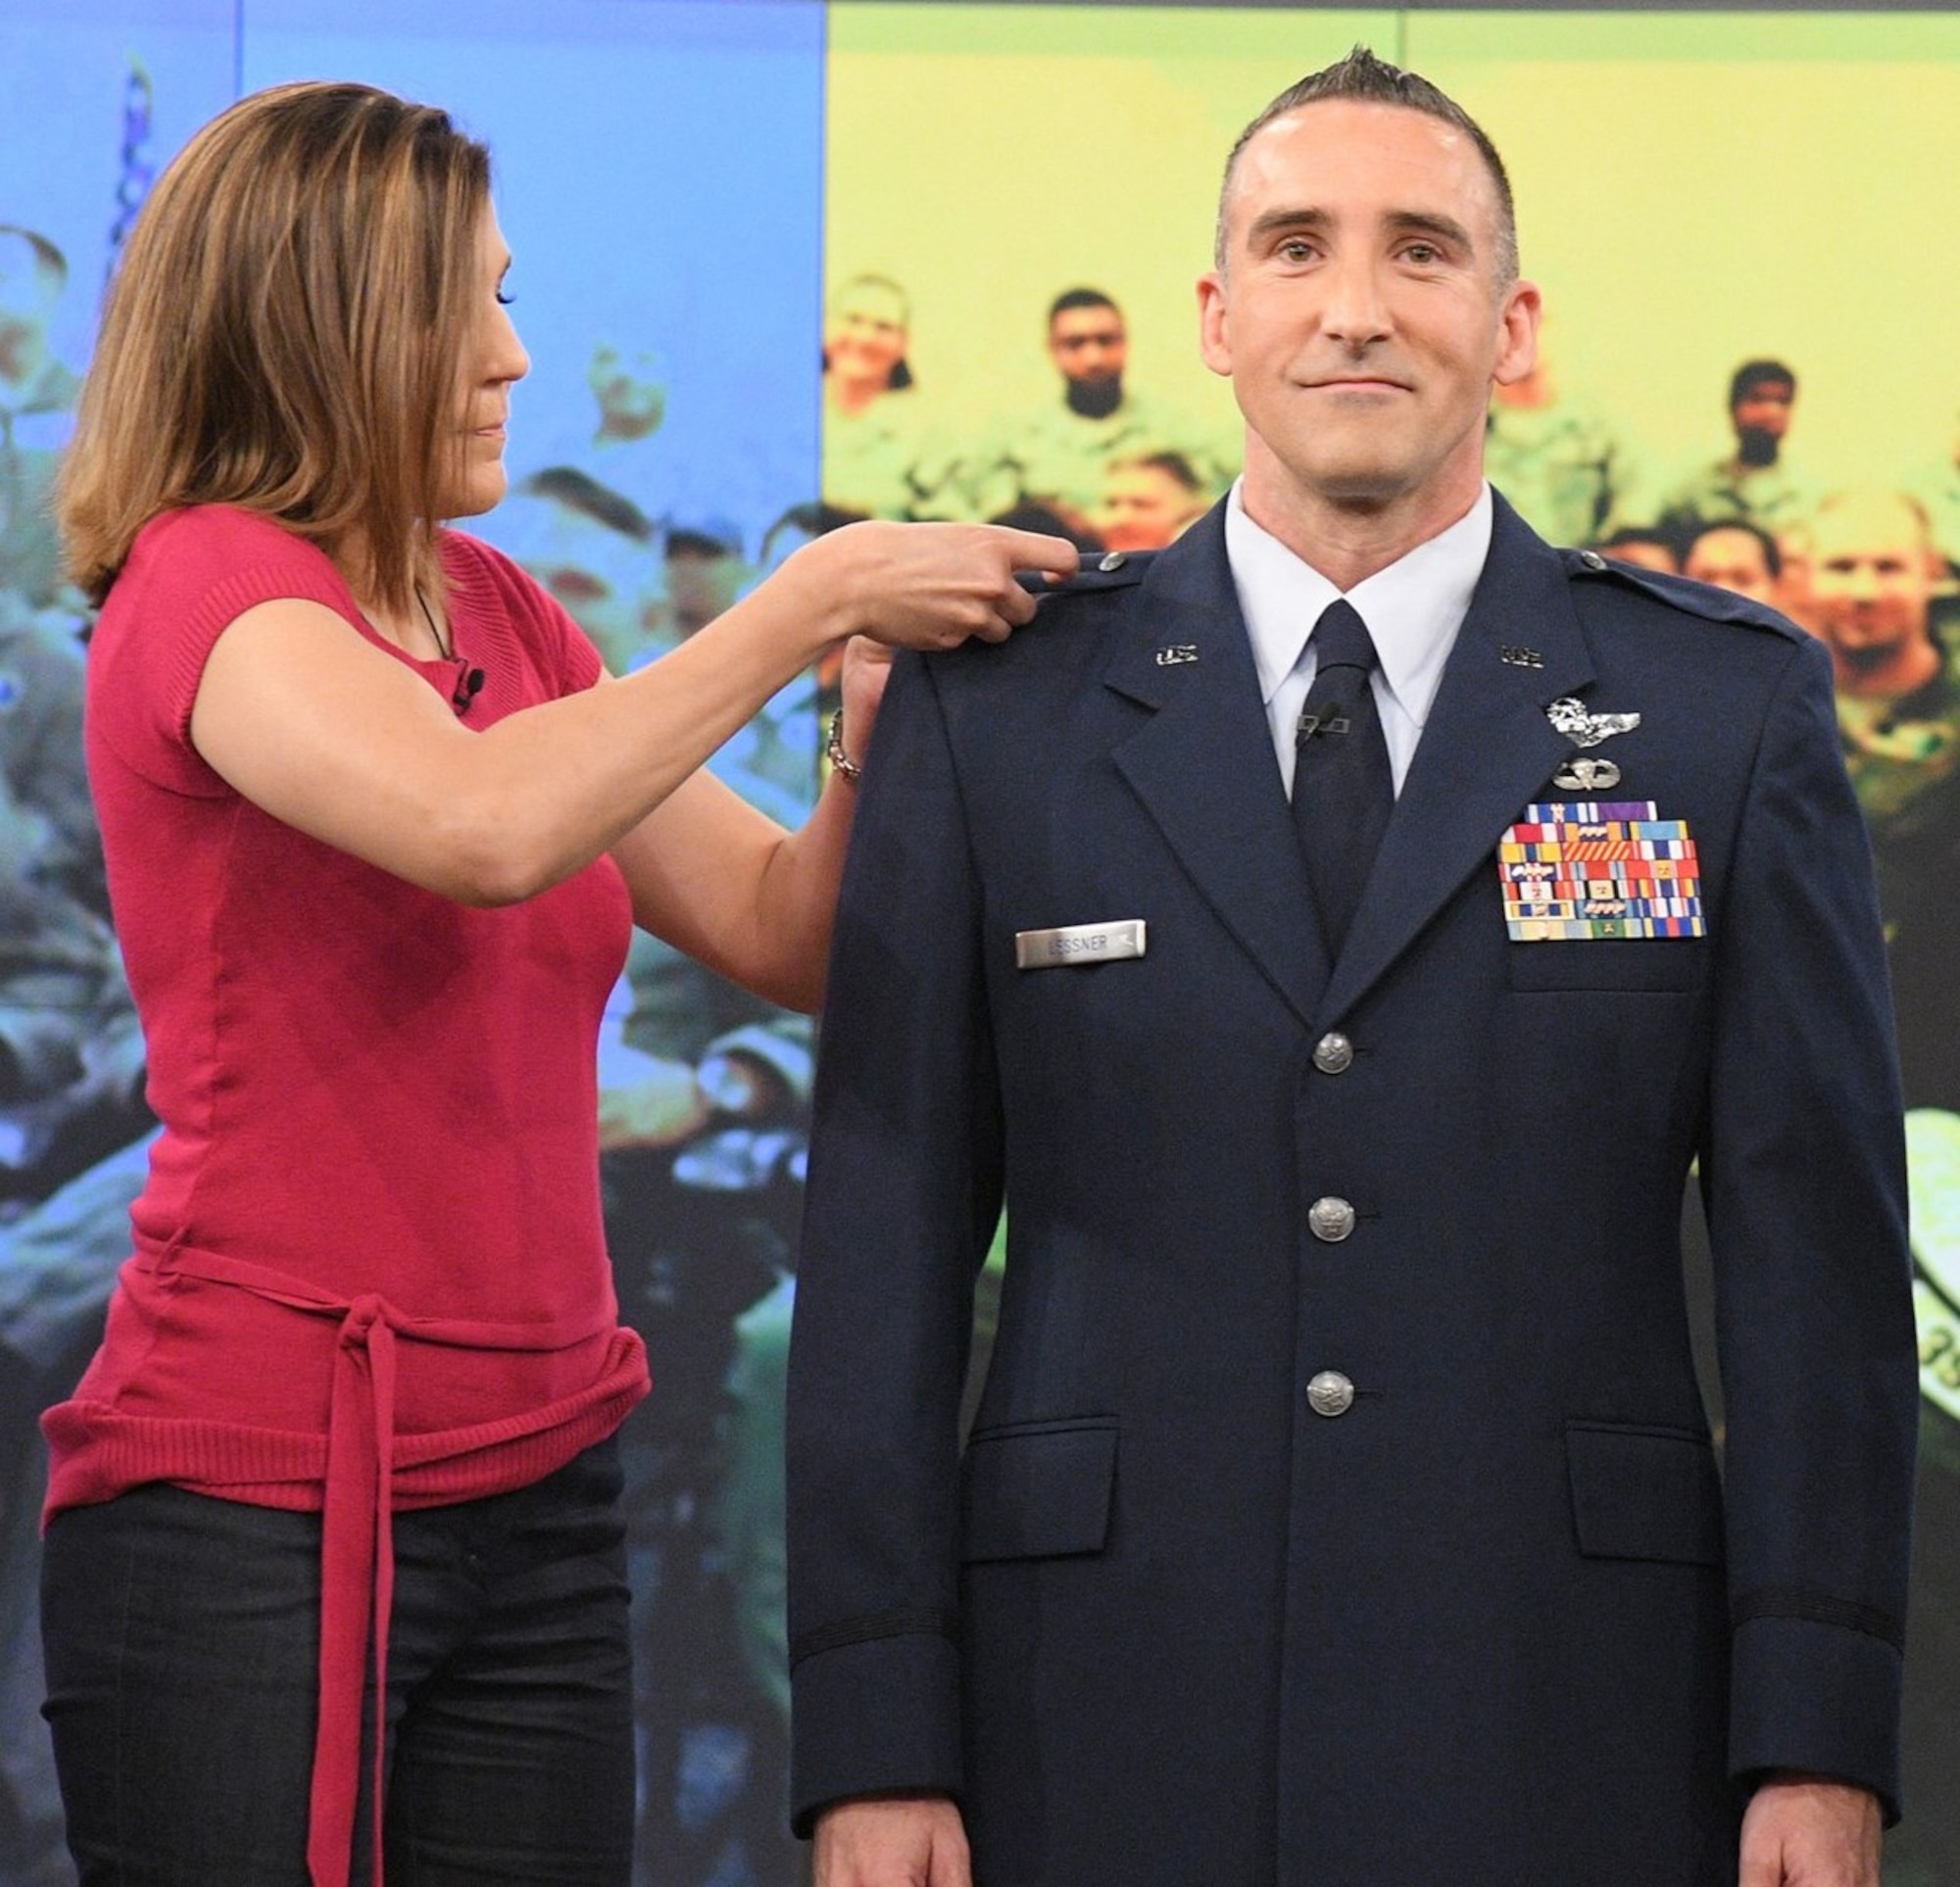 Lt. Col. Thomas Lessner’s wife Kathleen pins on his new rank insignia following his on-air promotion on “The View”. Lessner appeared on the show in support of a larger Memorial Day tribute featuring former U.S, Secretary of Defense, Donald Rumsfeld as the guest host. Lessner shared his story of resilience that helped him and his family overcome many challenges, including a rocket propelled grenade strike on his helicopter during Operation Iraqi Freedom. (ABC courtesy photo).